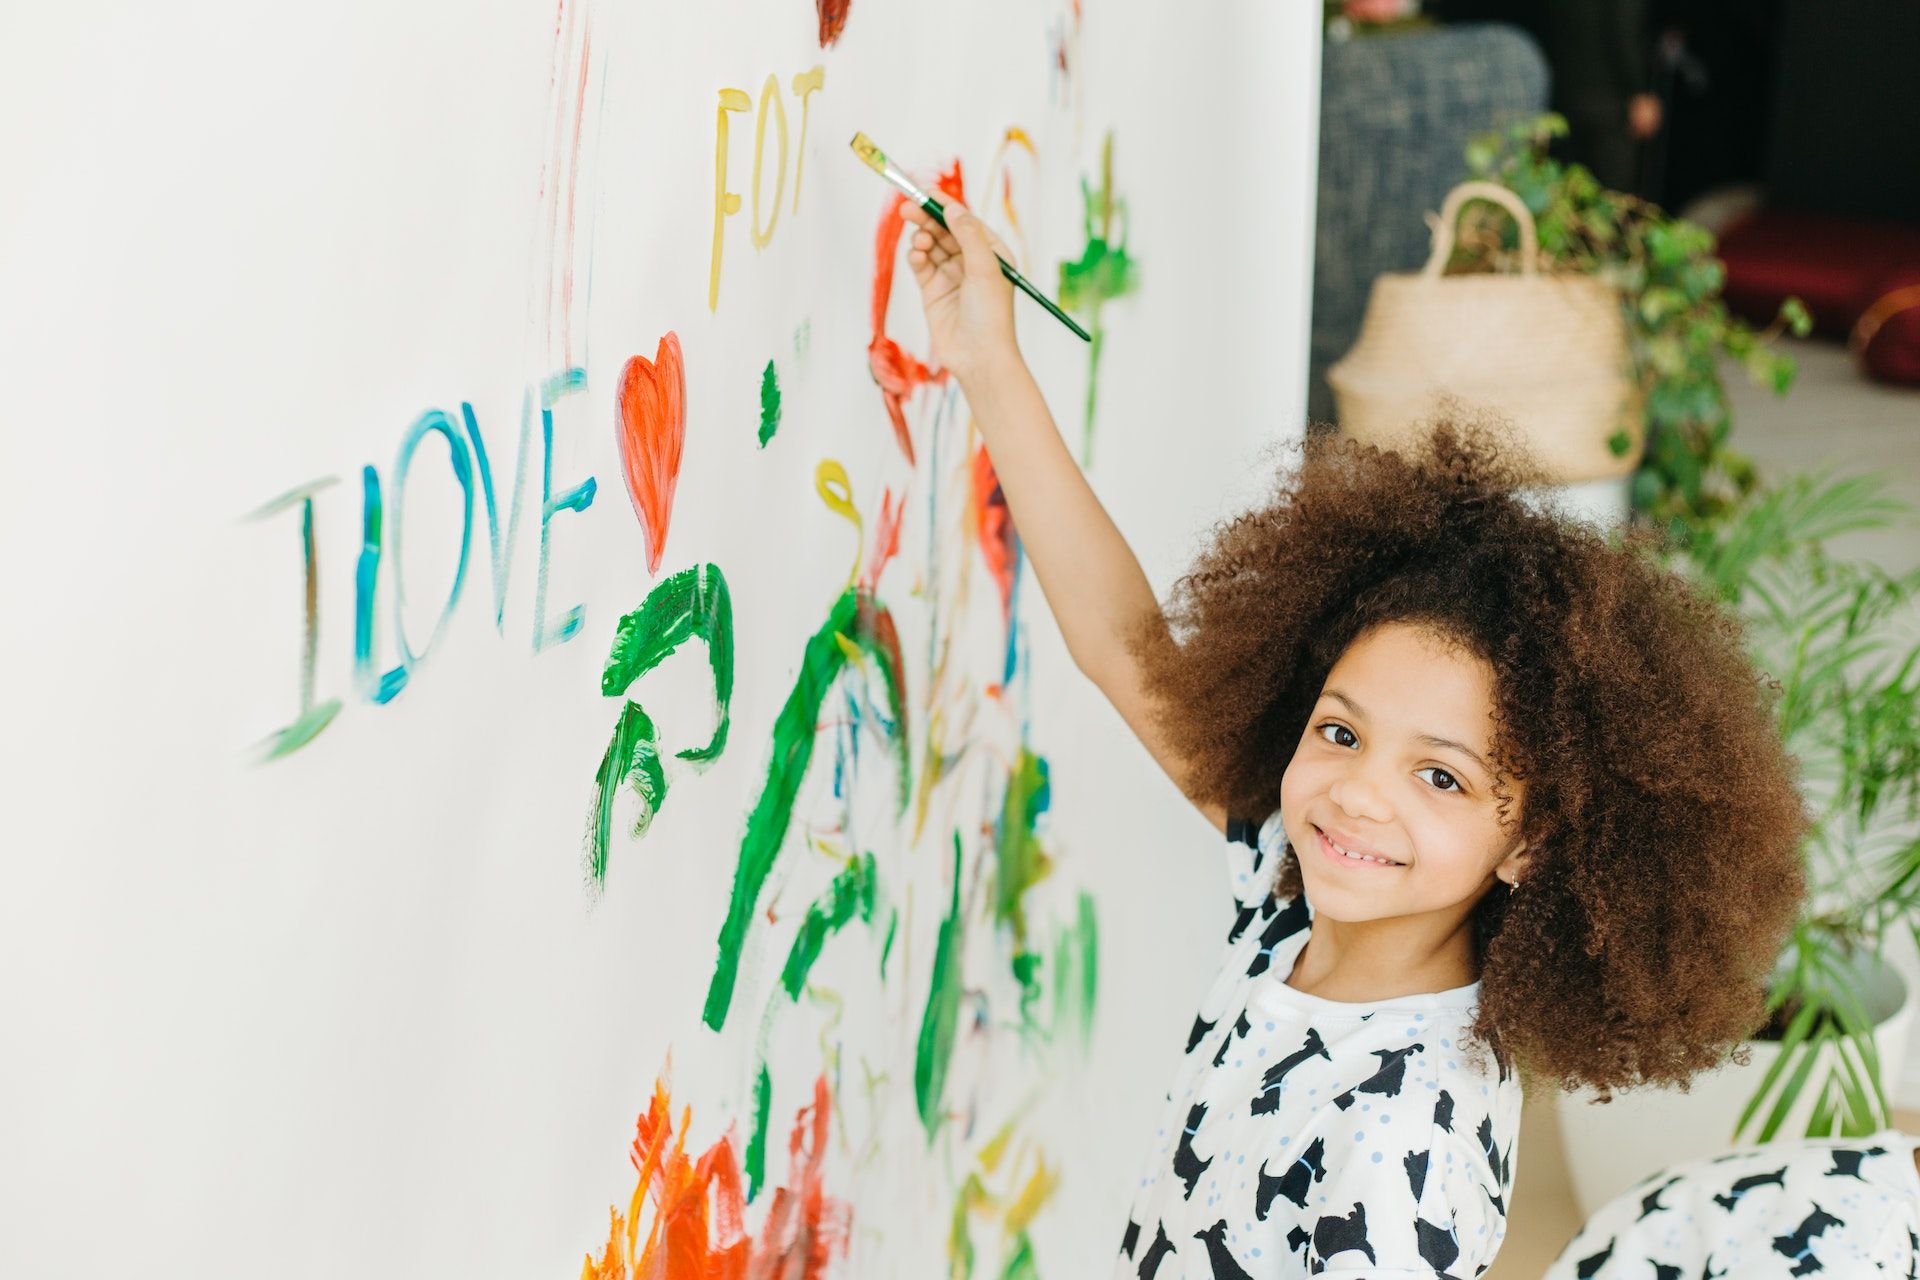 Child paints on the wall.